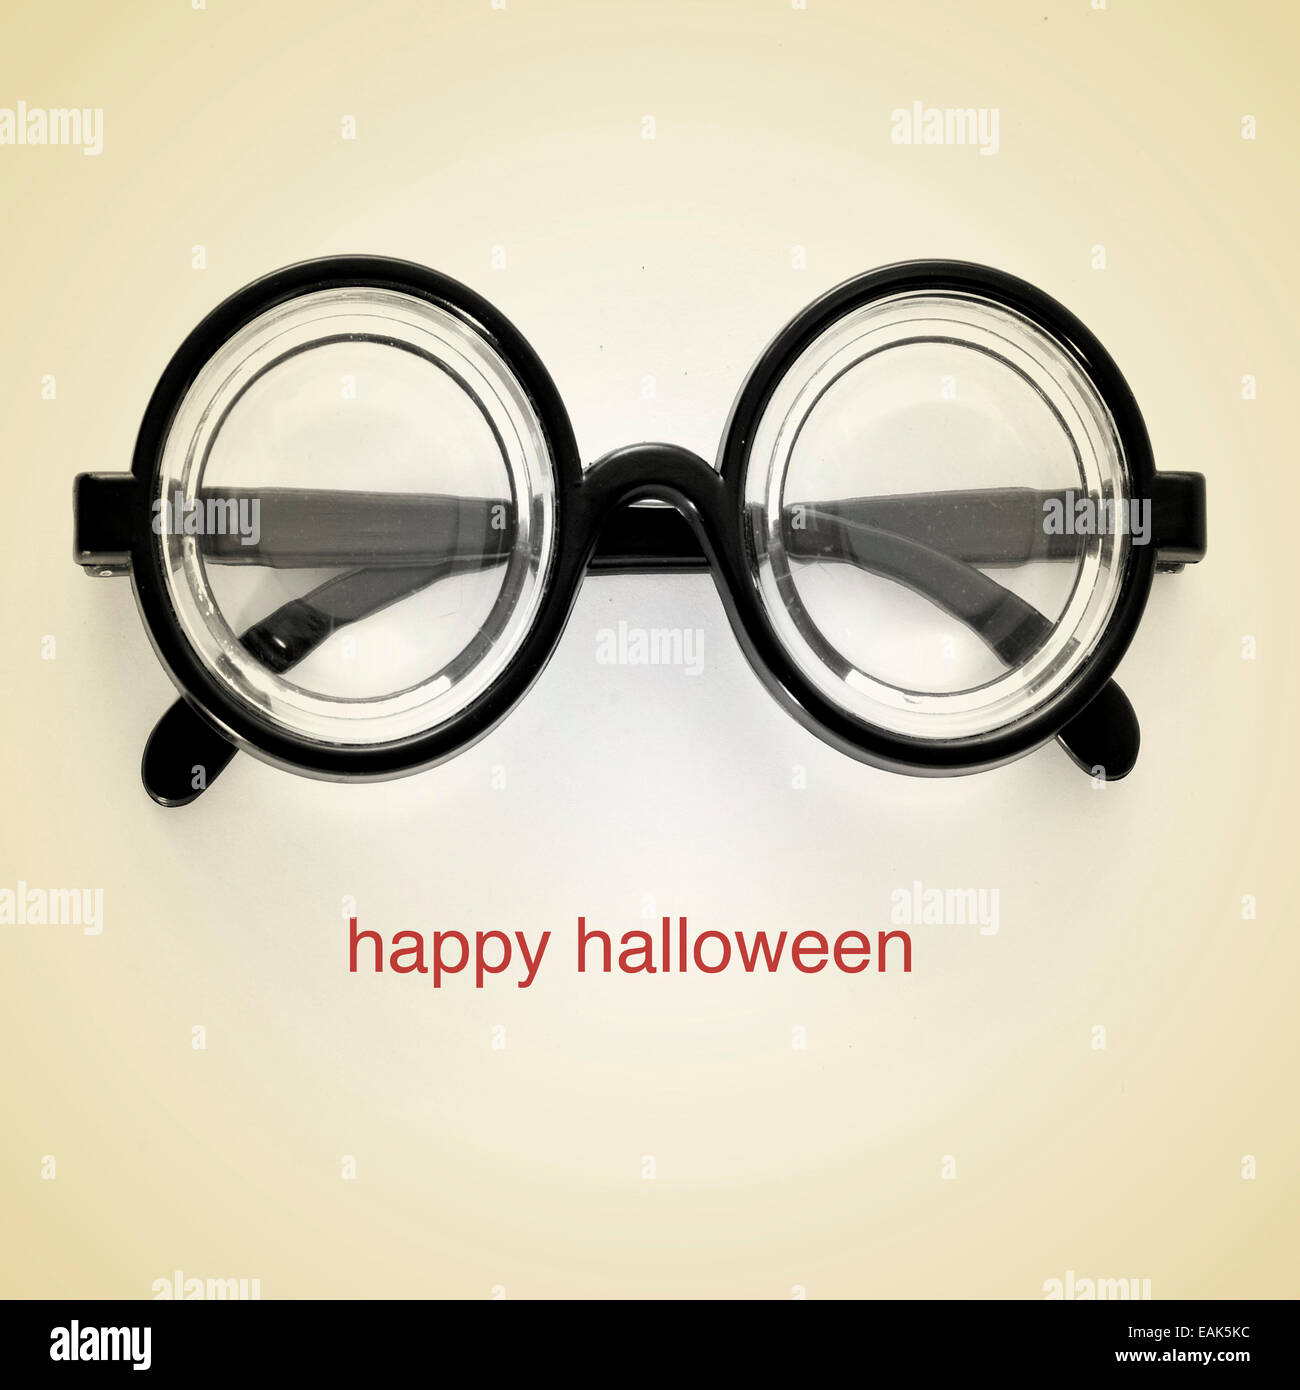 picture of short-sighted glasses and the sentence happy halloween on a beige background, with a retro effect Stock Photo